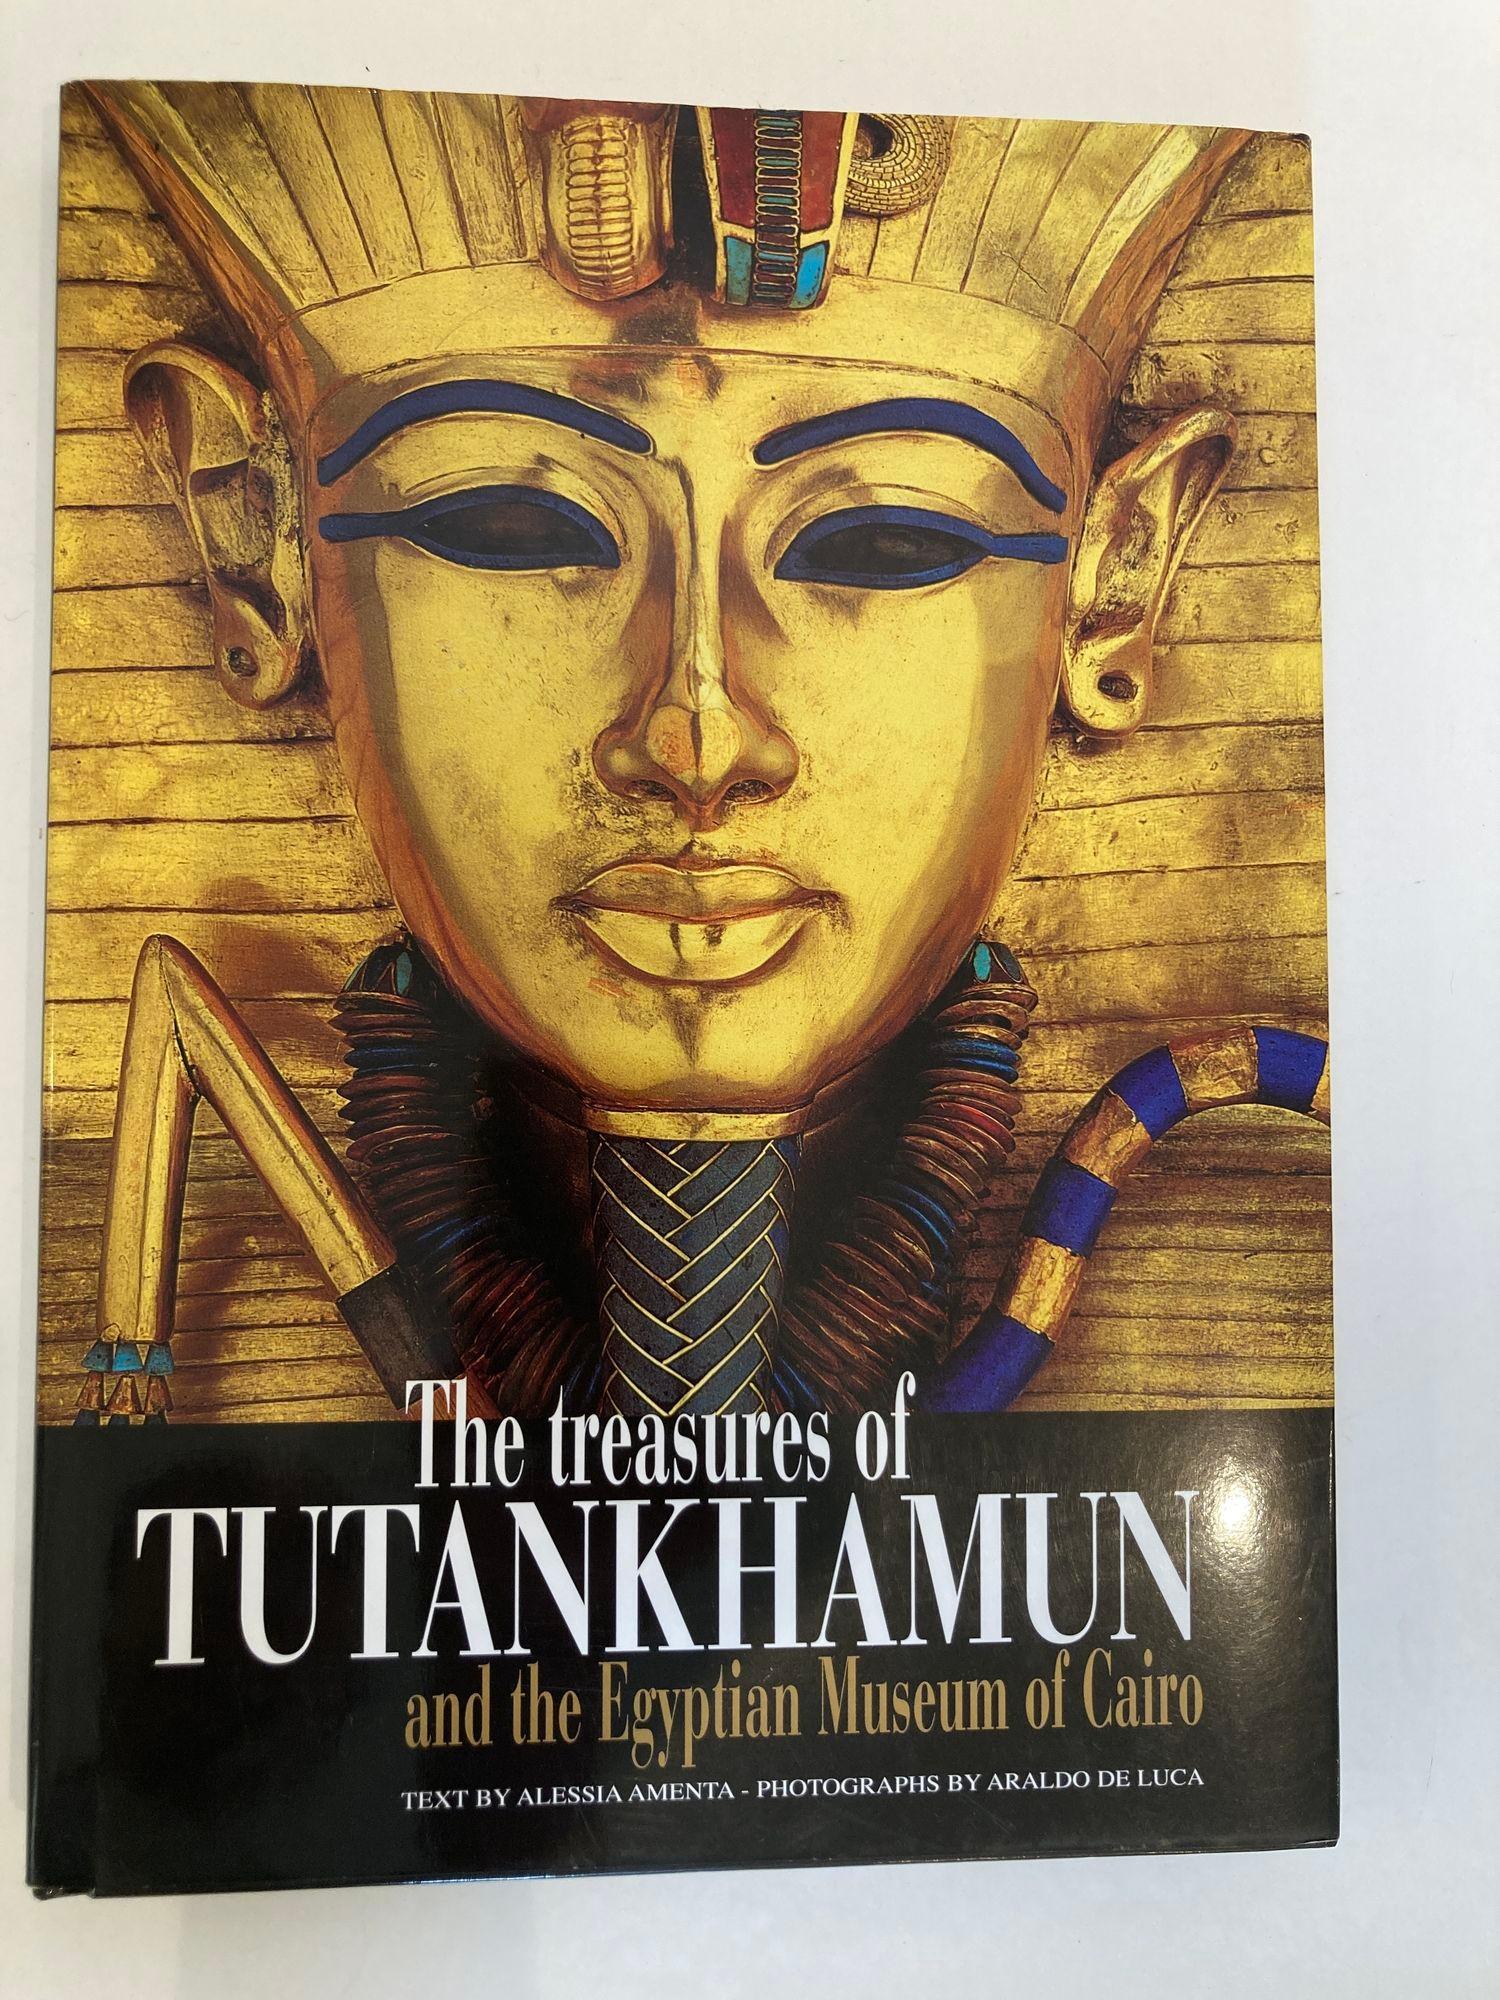 The Treasures of Tutankhamun and the Egyptian Museum in Cairo HardcoverIllustrated, January 1, 2005 by Alessia Amenta (Author), Araldo De Luca (Photographer).This book takes a close look at the history of ancient Egypt, era by era, illustrating a